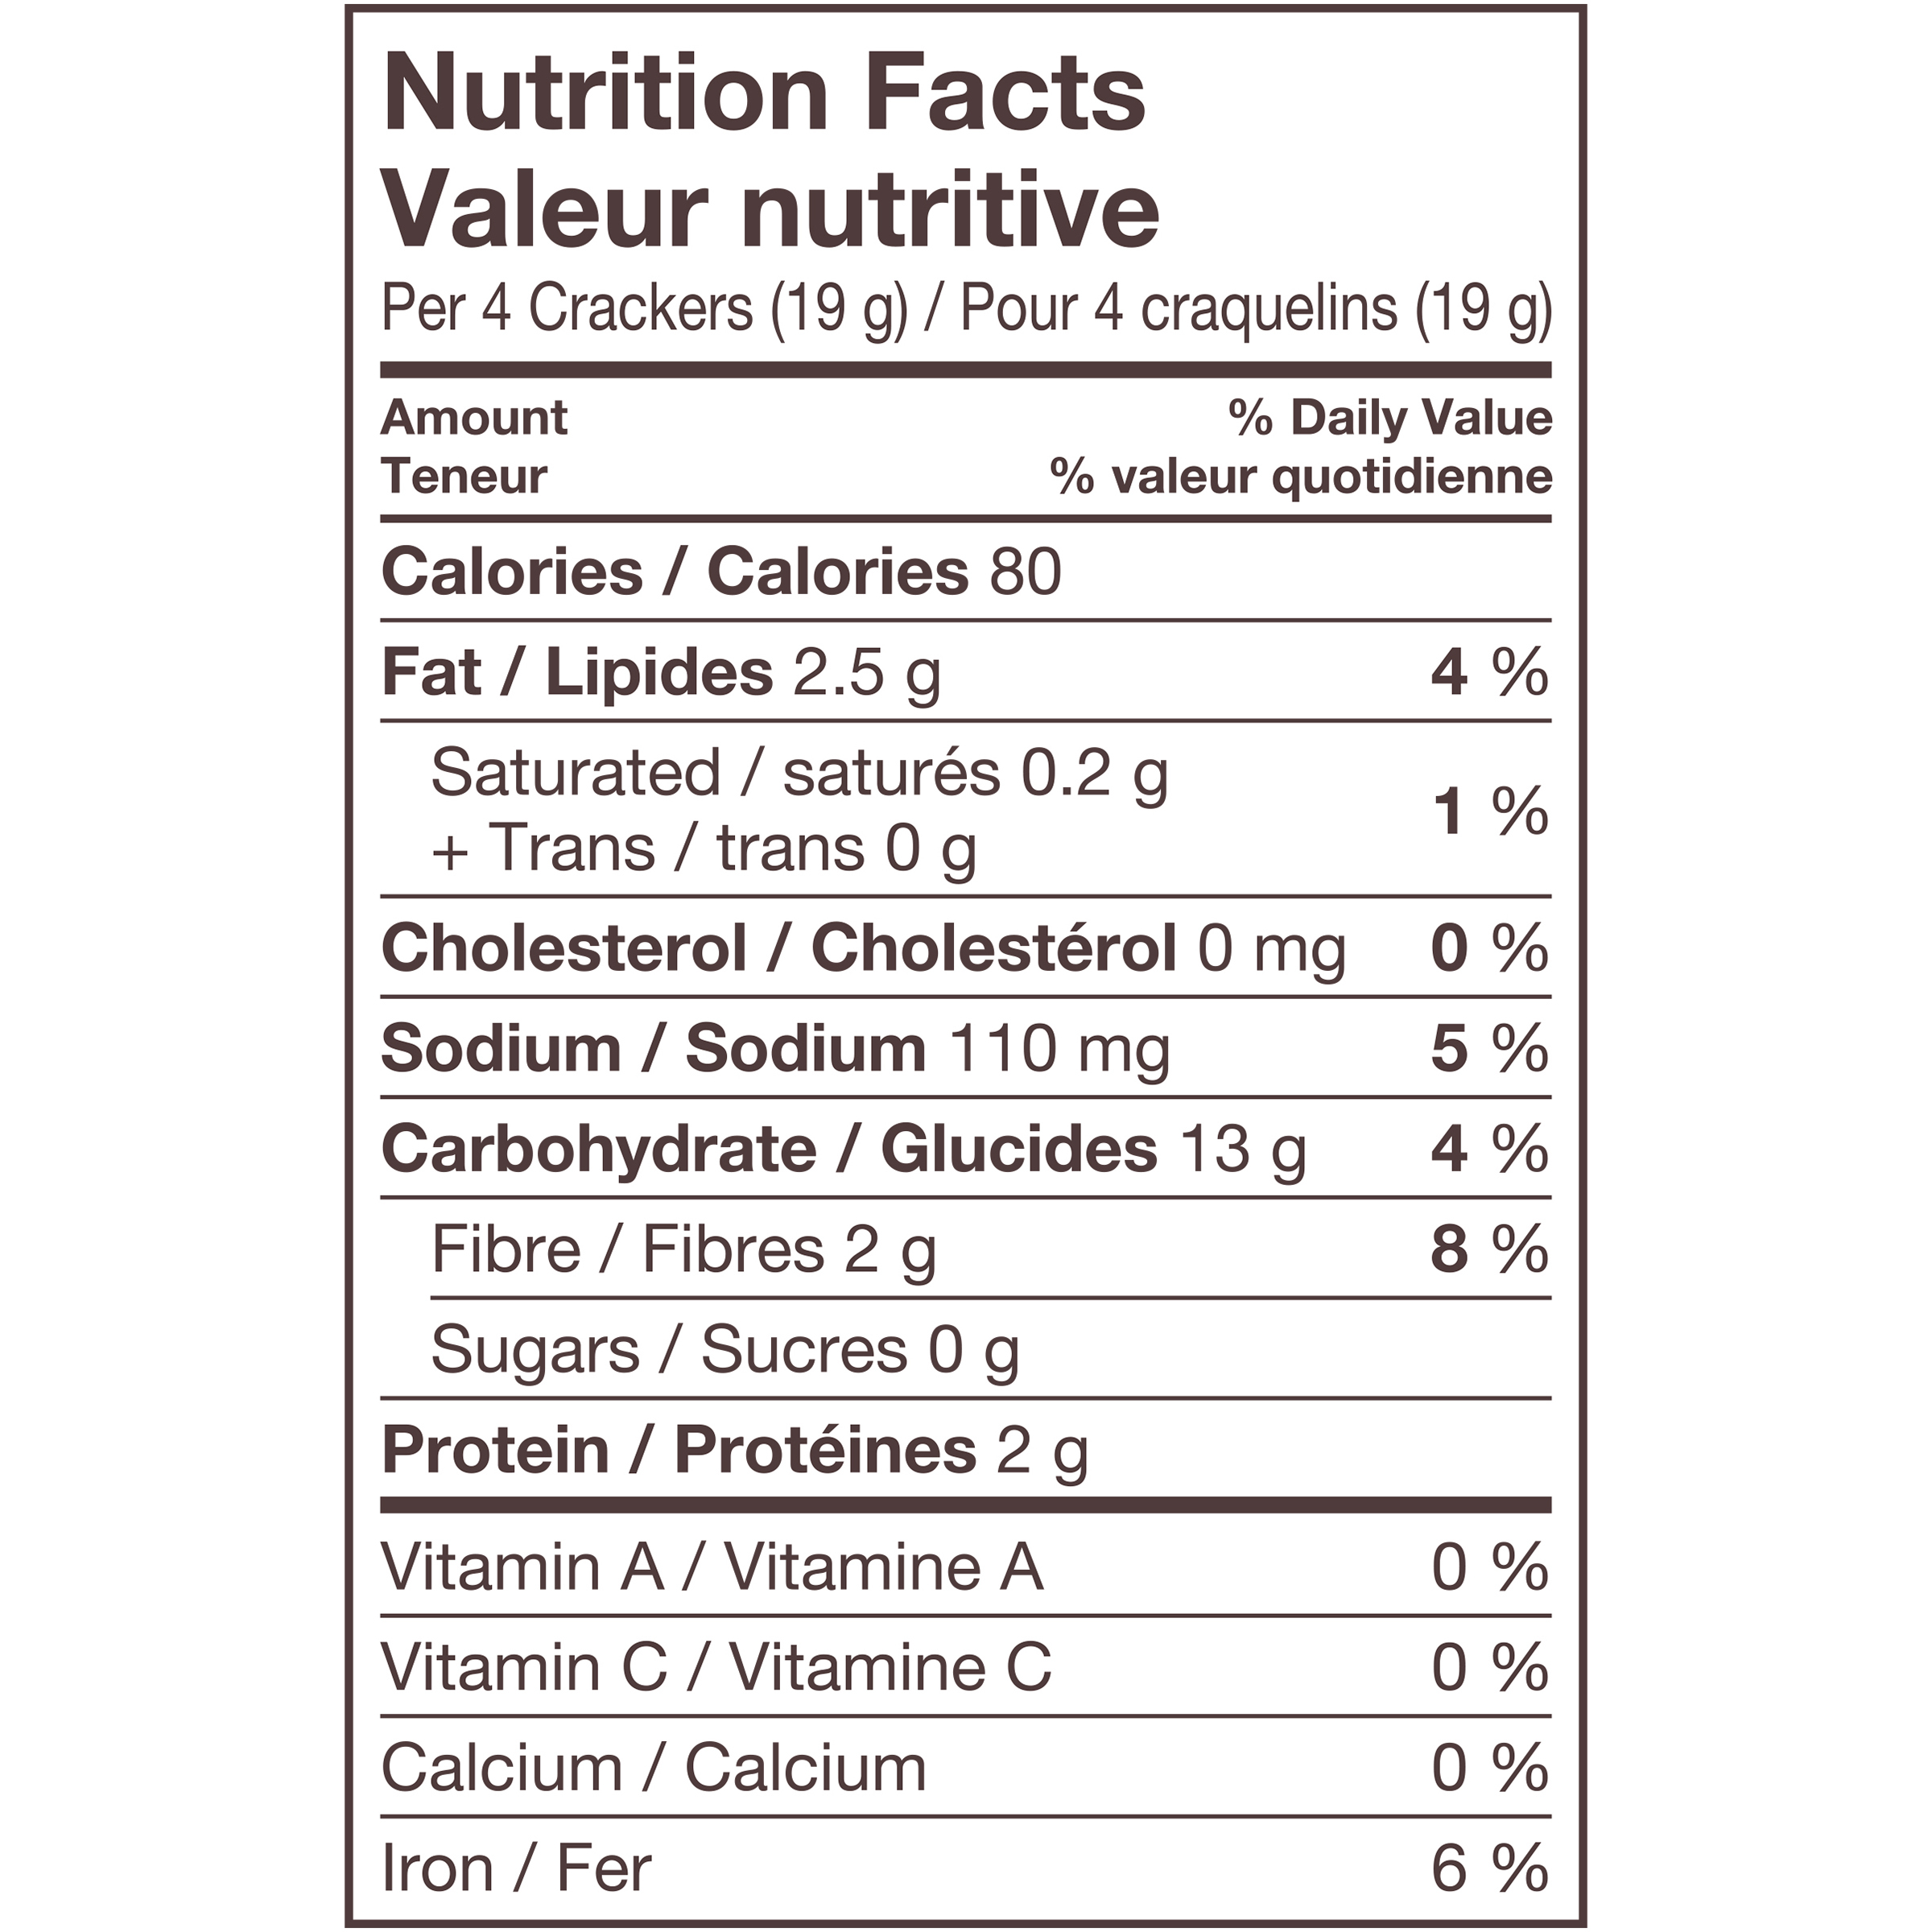 <%=lblProductName.InnerText %> Nutrition Fact small